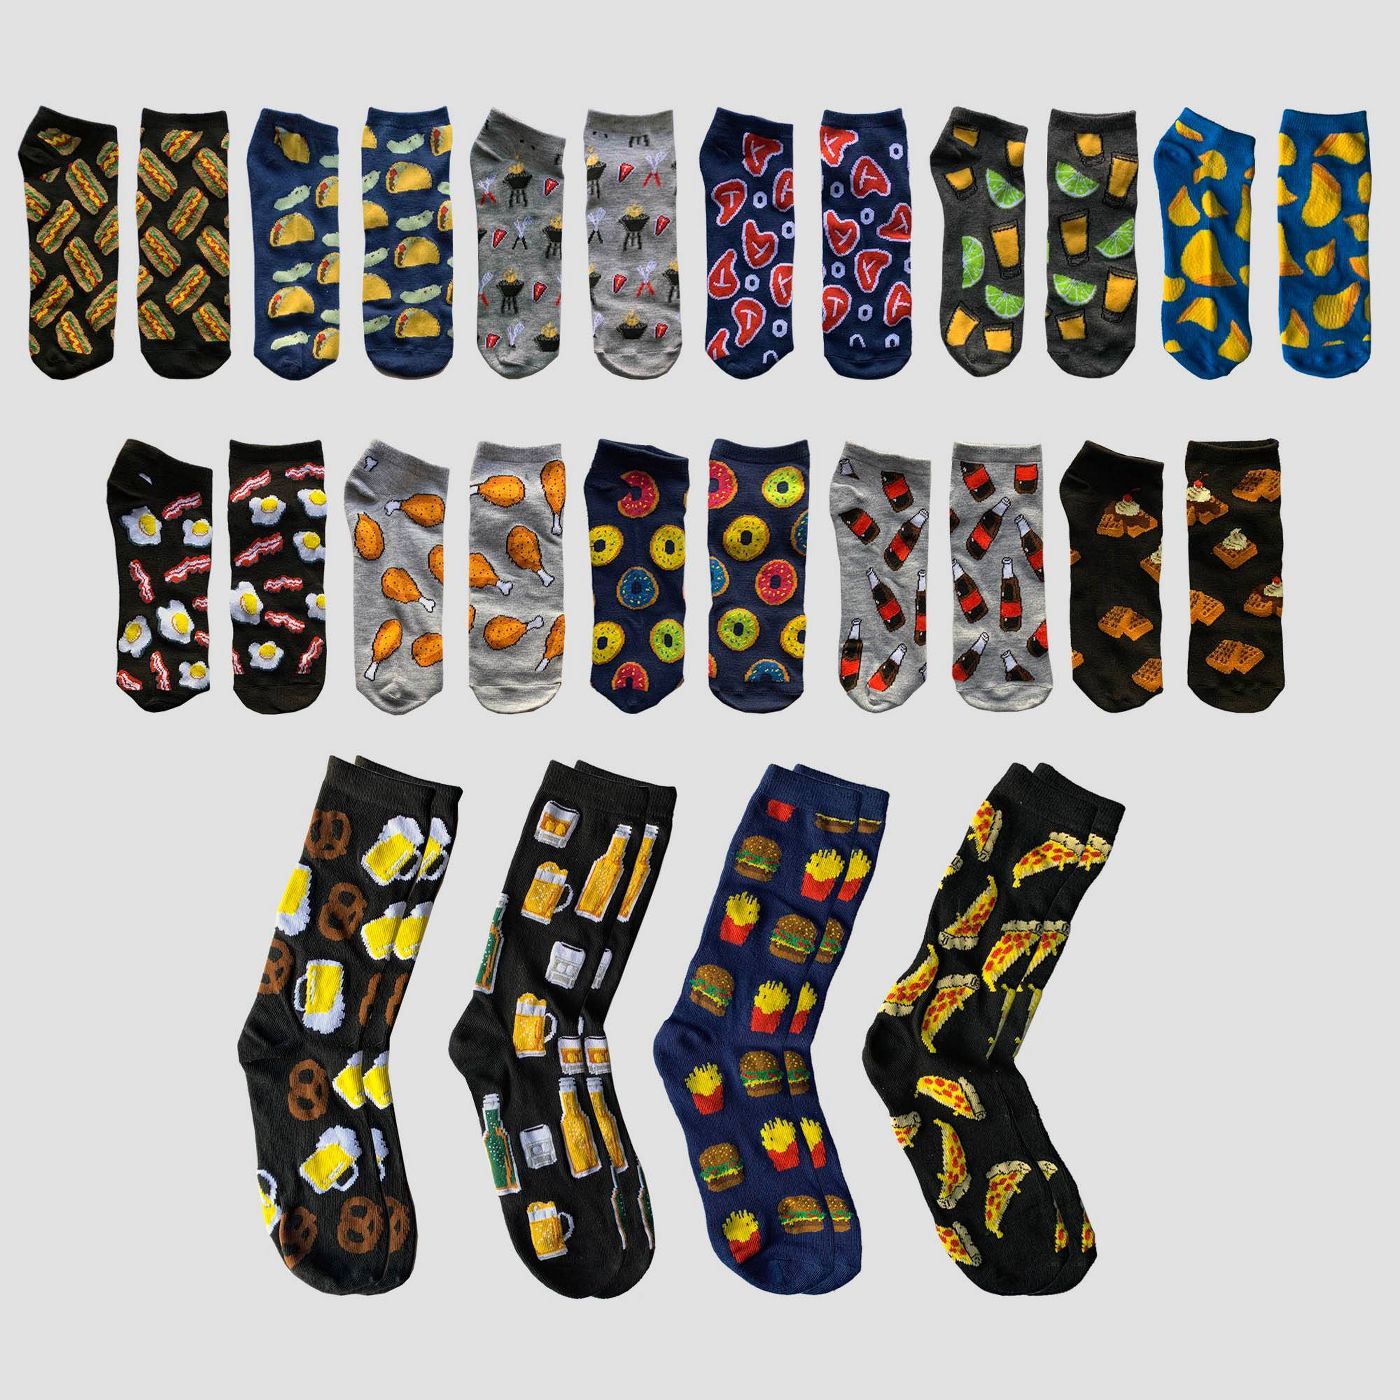 Men's Food Only 15 Days of Socks Advent Calendar - Assorted Colors One Size - image 1 of 4